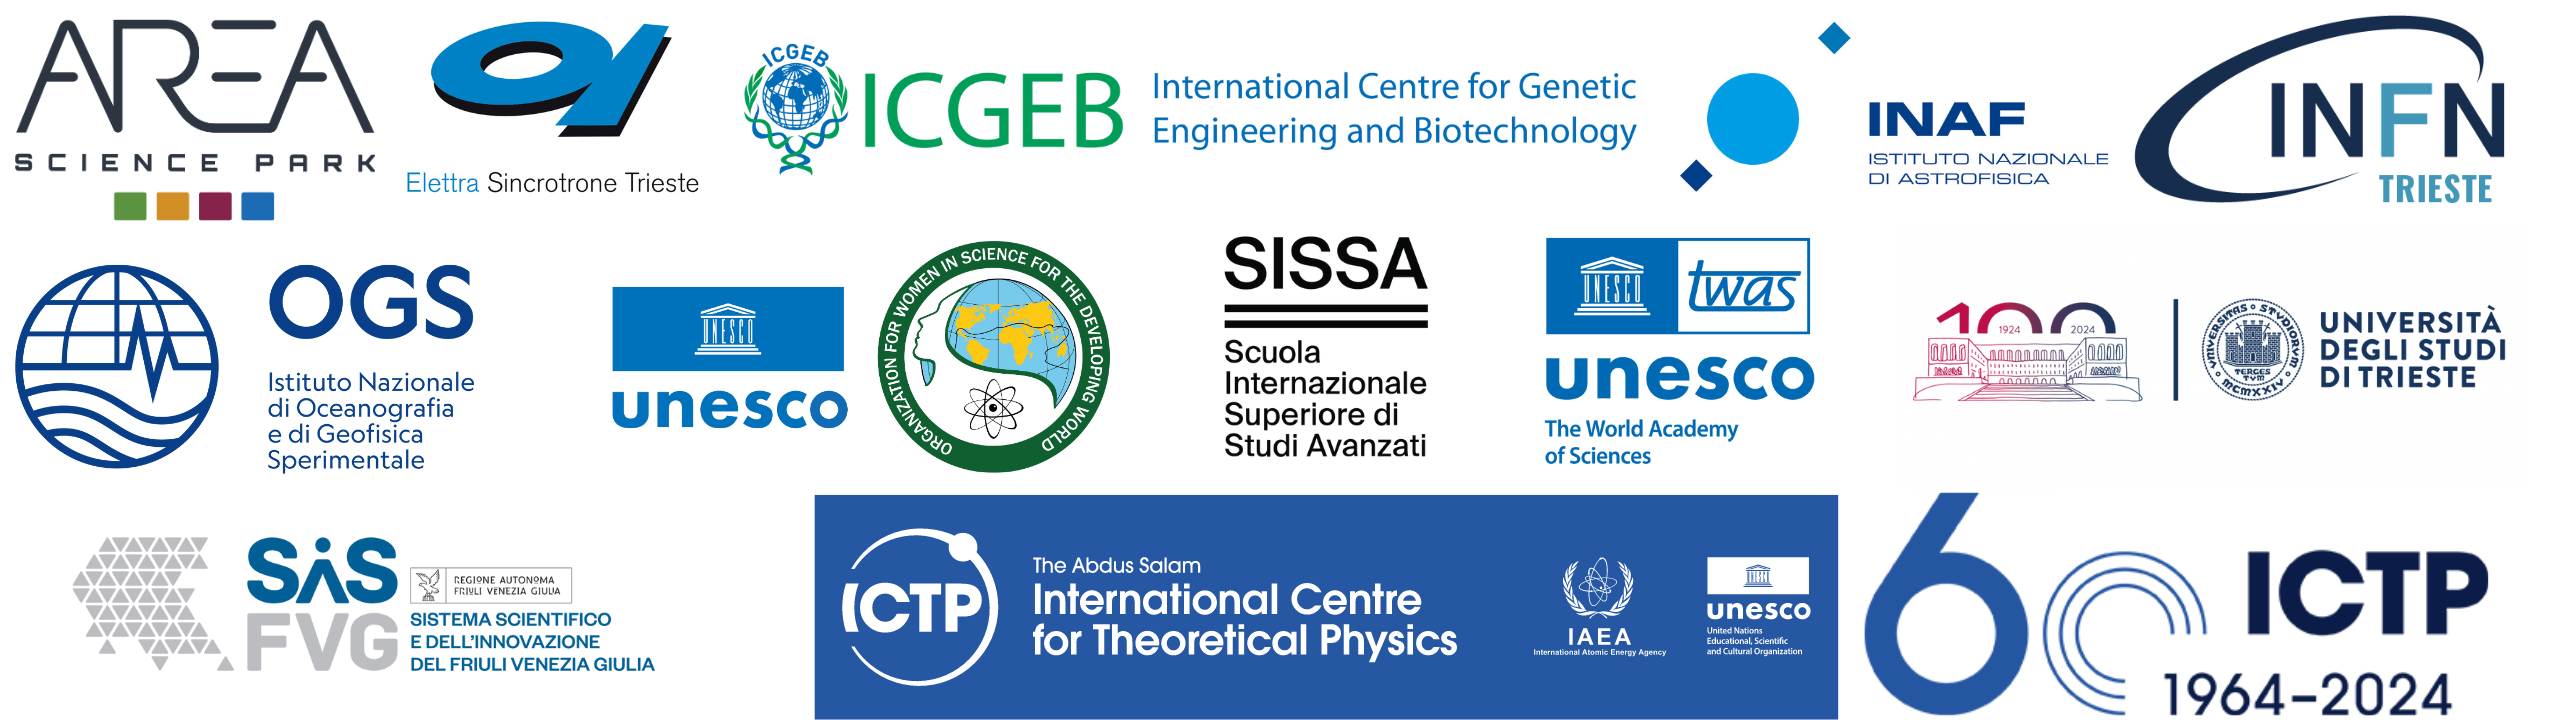 Istititutes in the Trieste Science System who will participate in the event